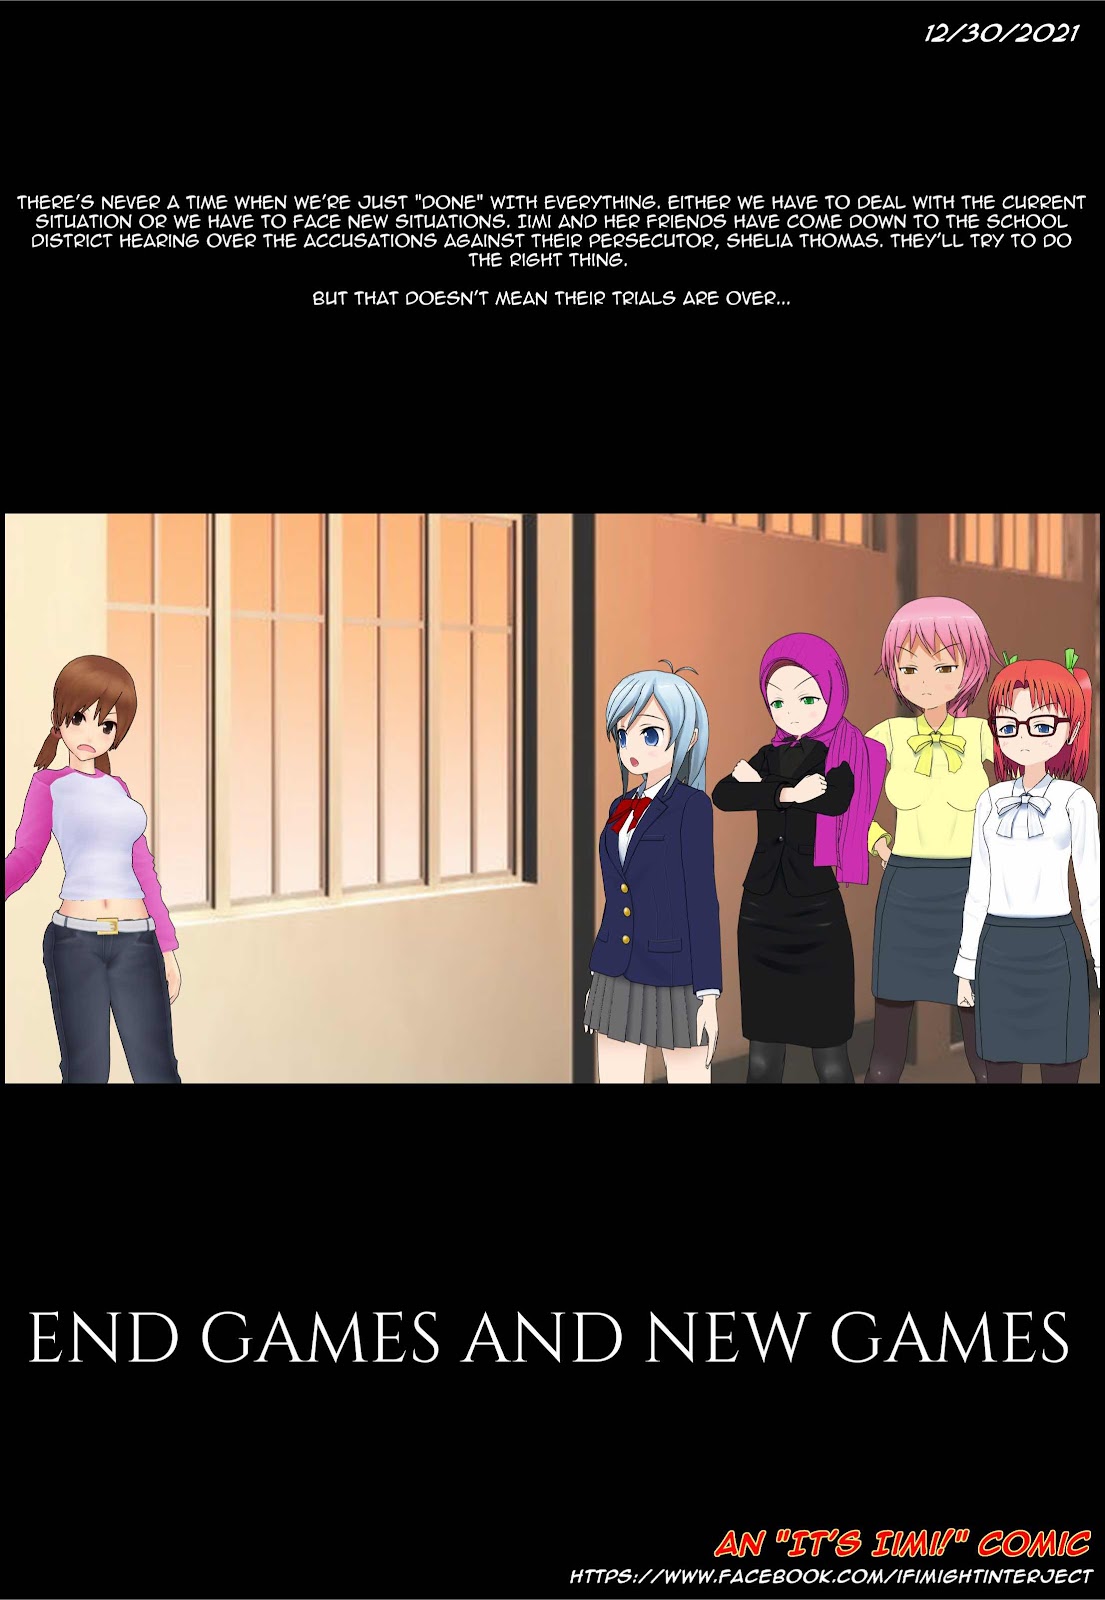 It’s Iimi! End Games and New Games